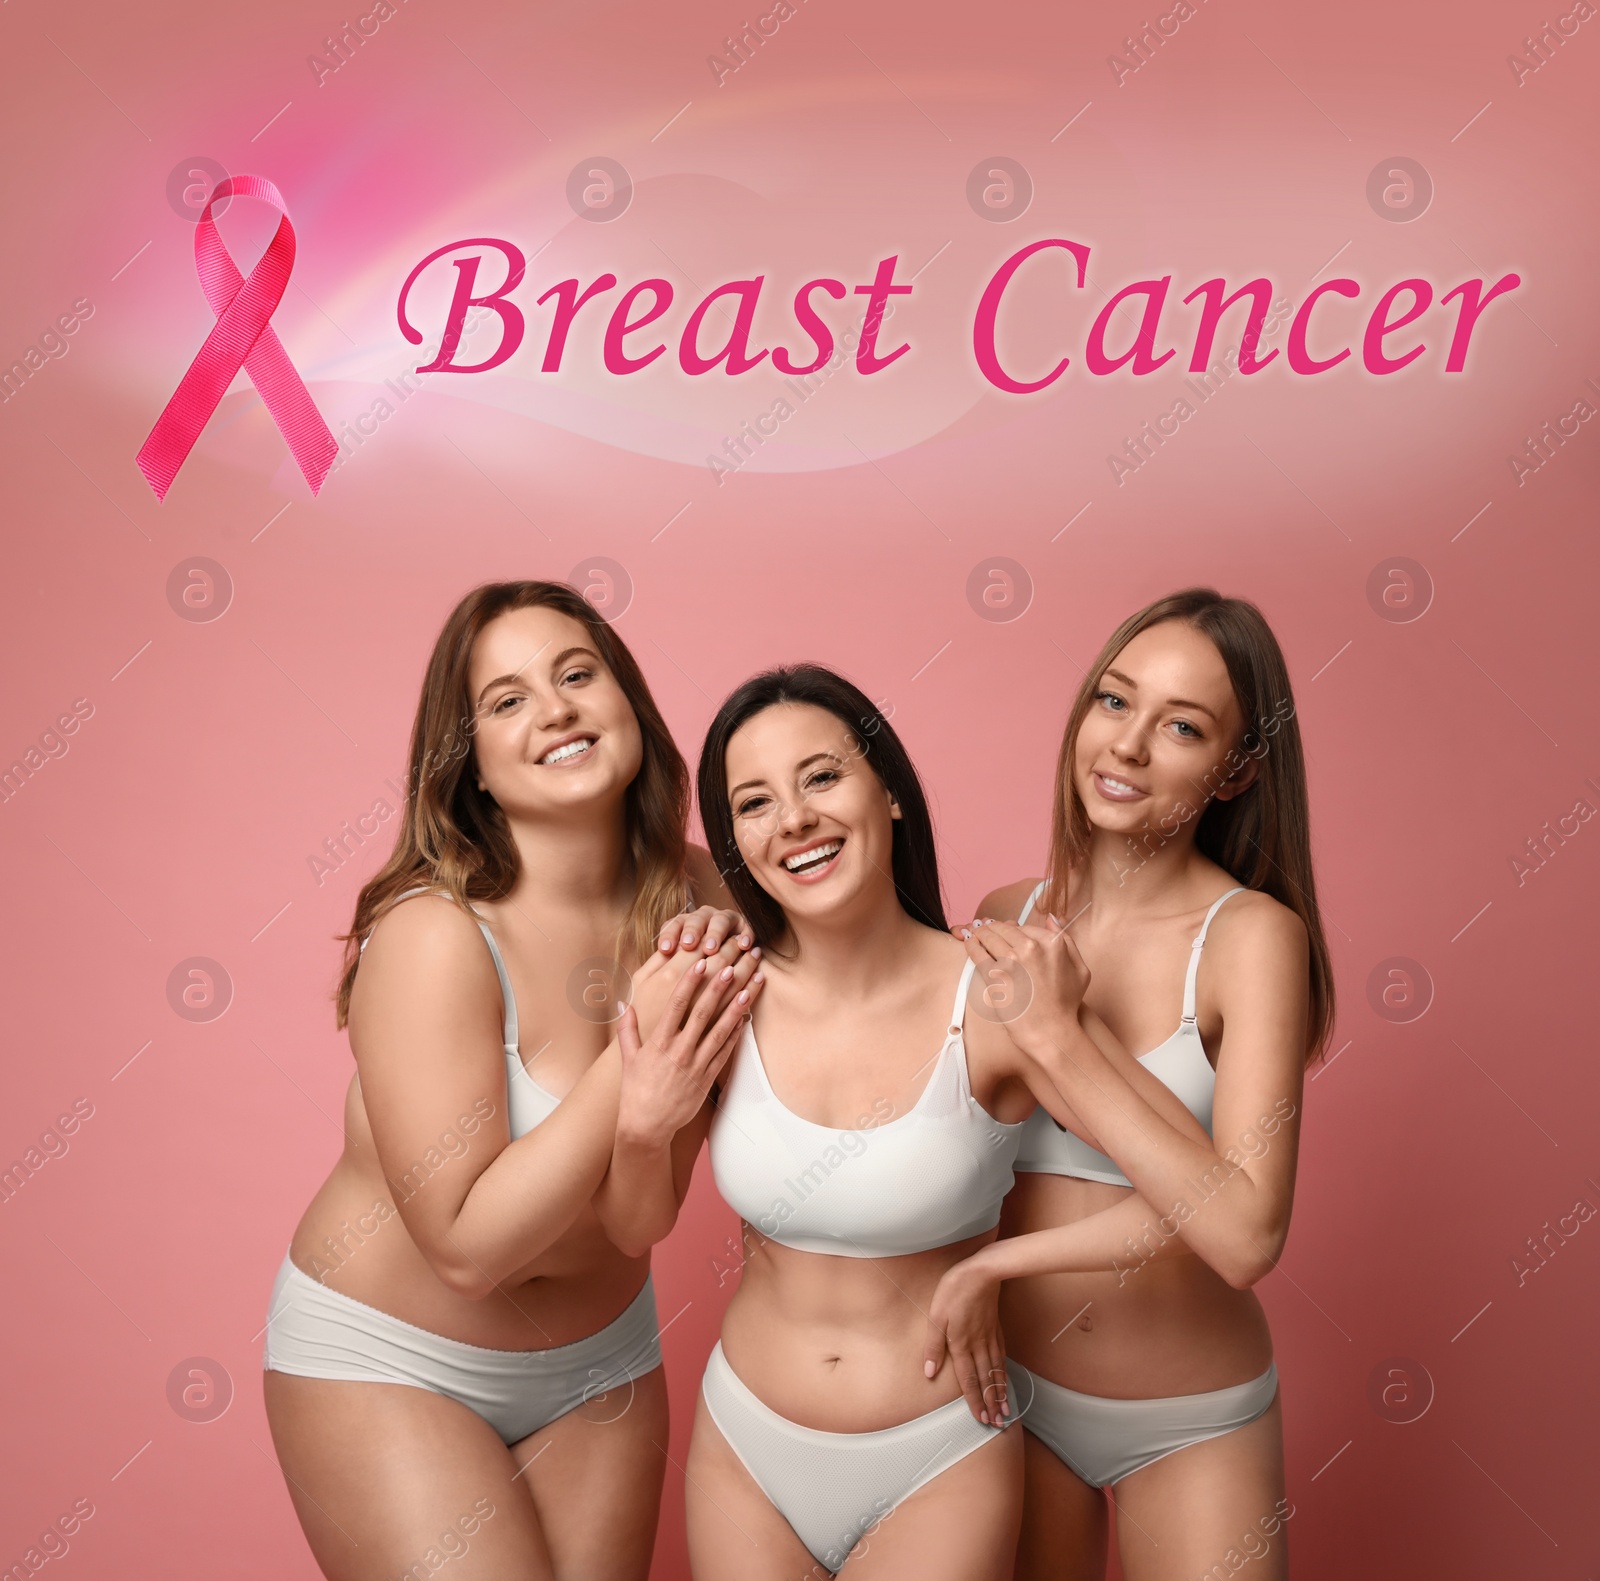 Image of Breast cancer awareness. Group of women in underwear on pink background